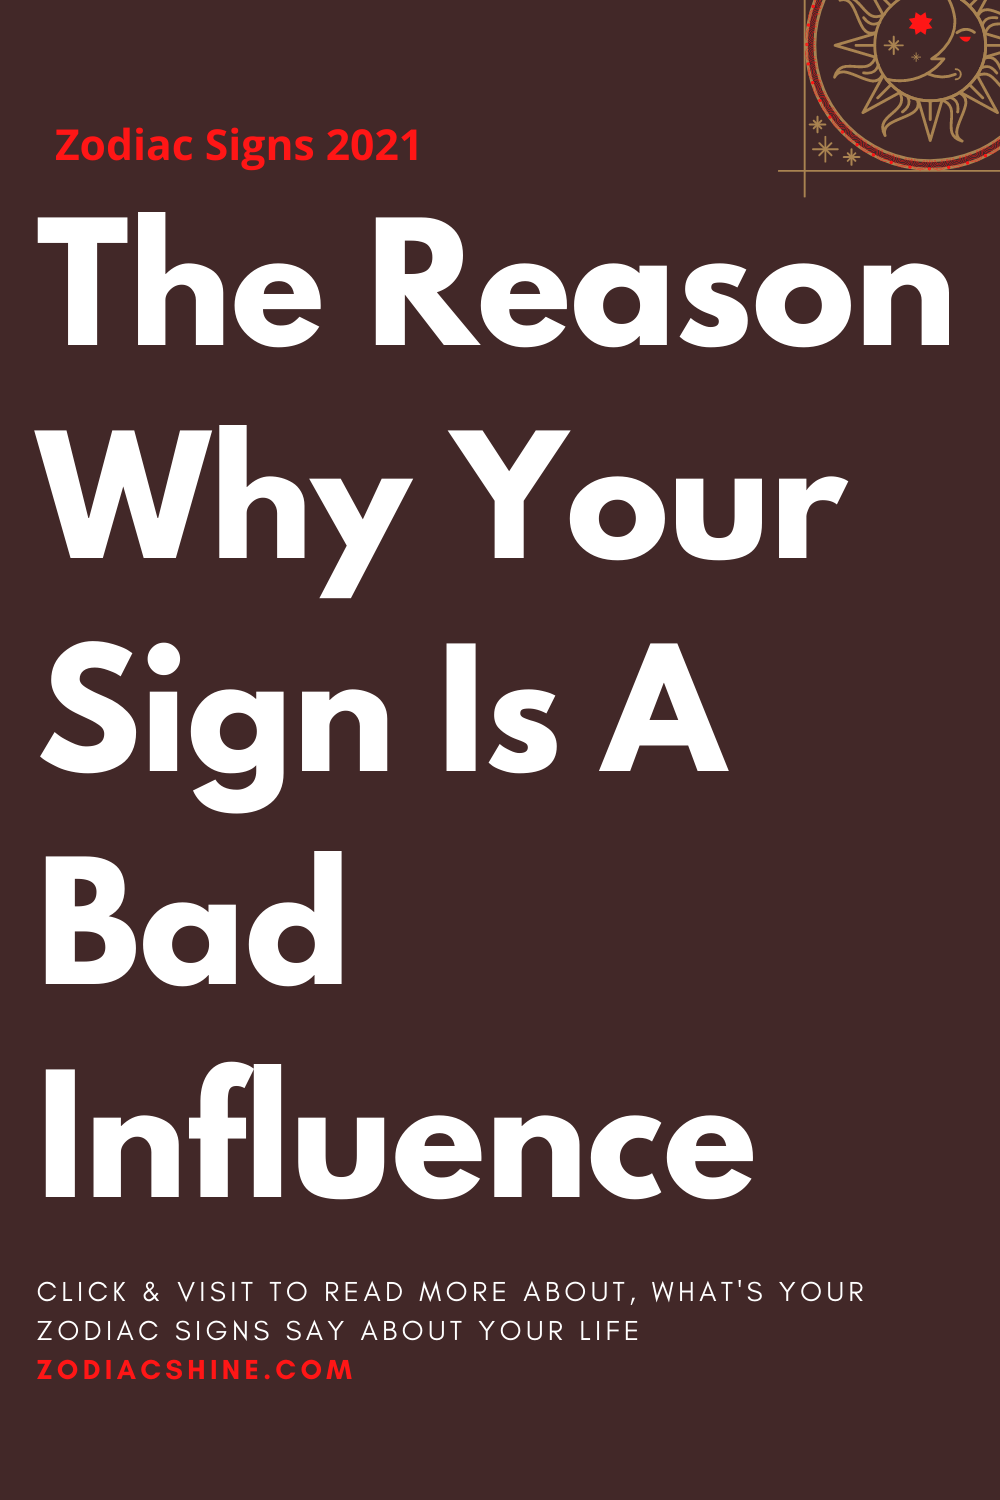 The Reason Why Your Sign Is A Bad Influence